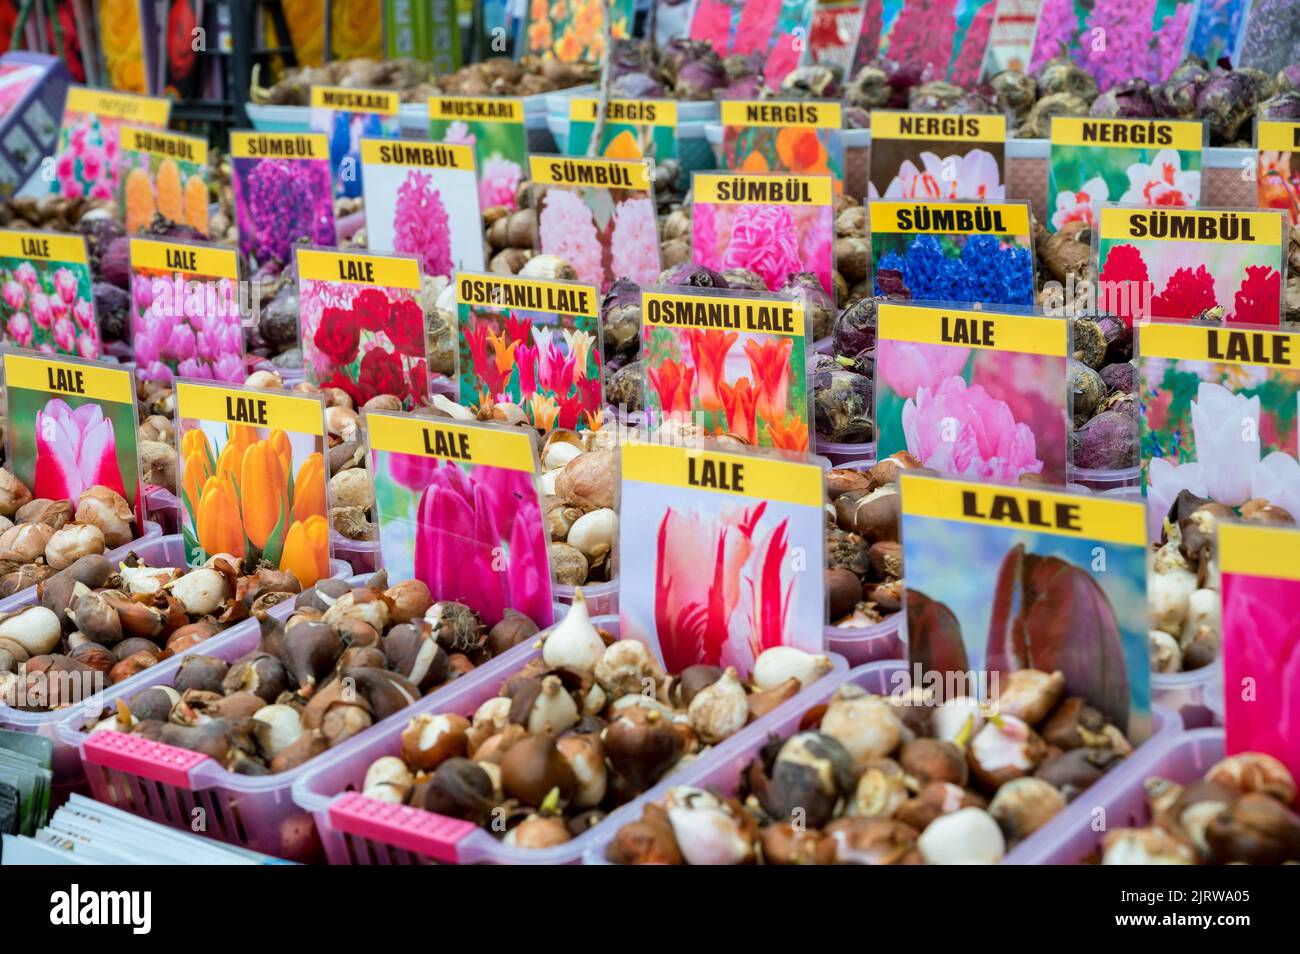 The view of different tulip and other flowers bulbs at the Egyptiam Market in Istanbul, Turkey 2022 Stock Photo